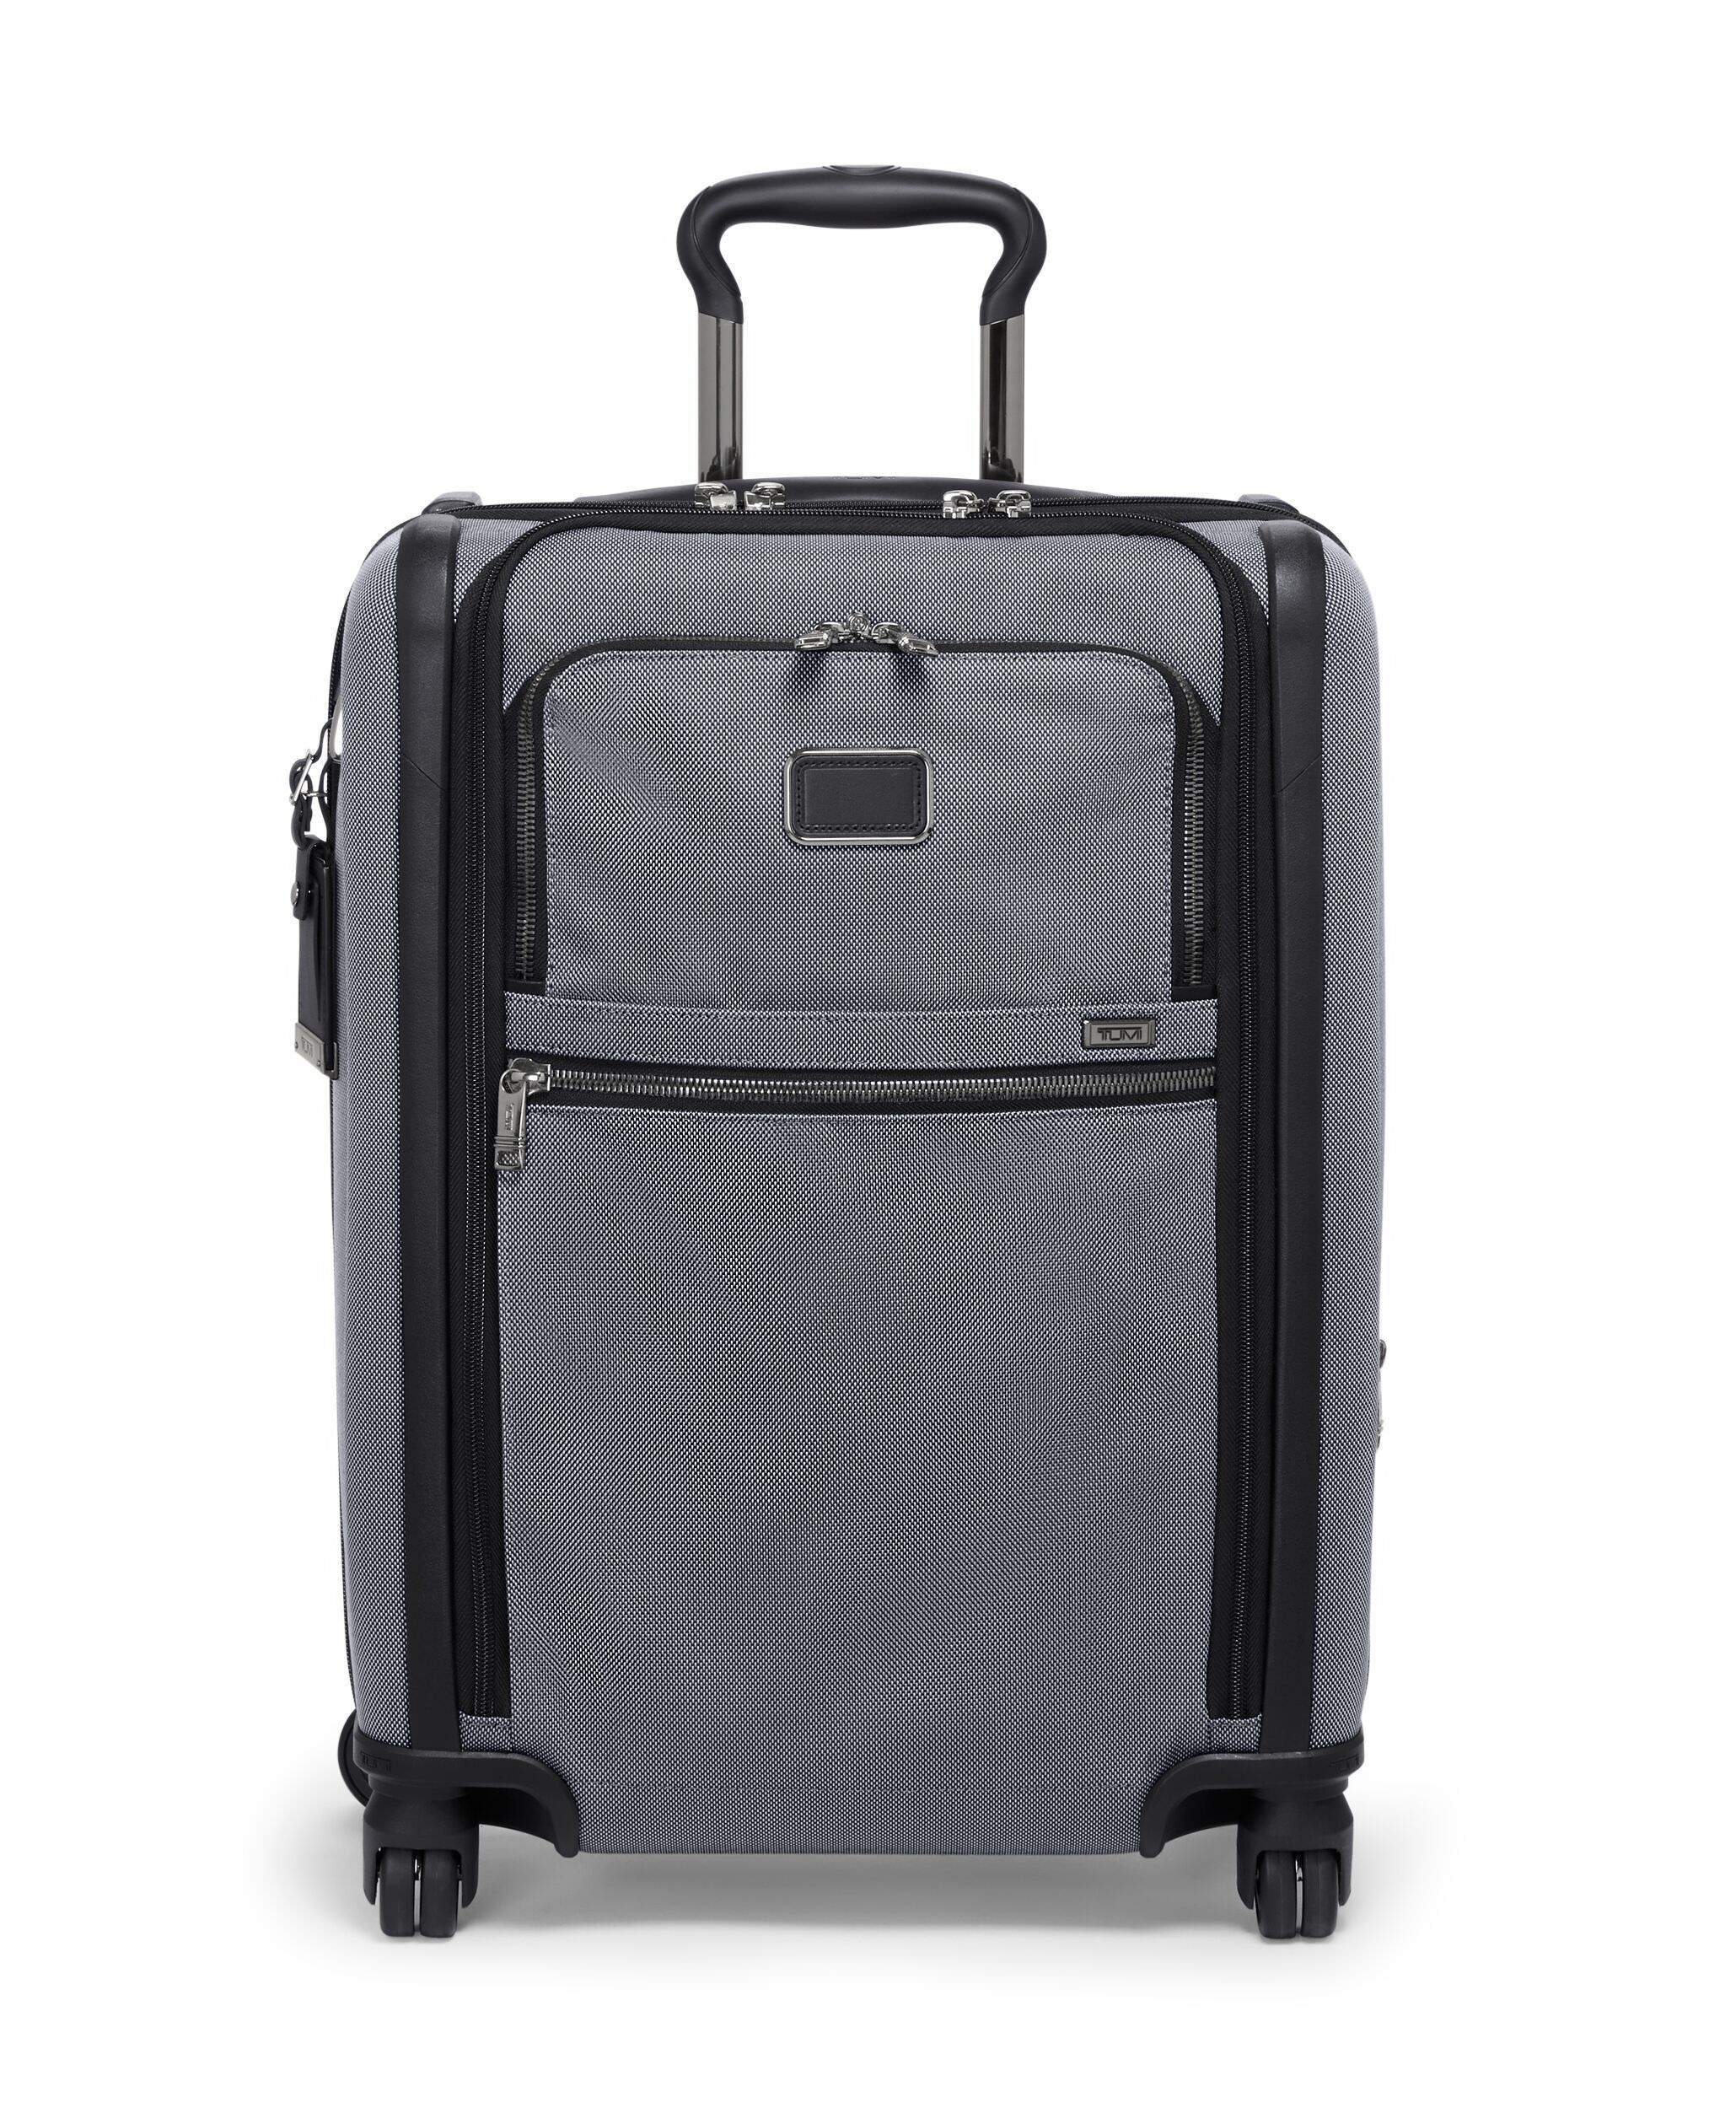 Carry-On Luggage: Small Suitcases & Hand Luggage | TUMI